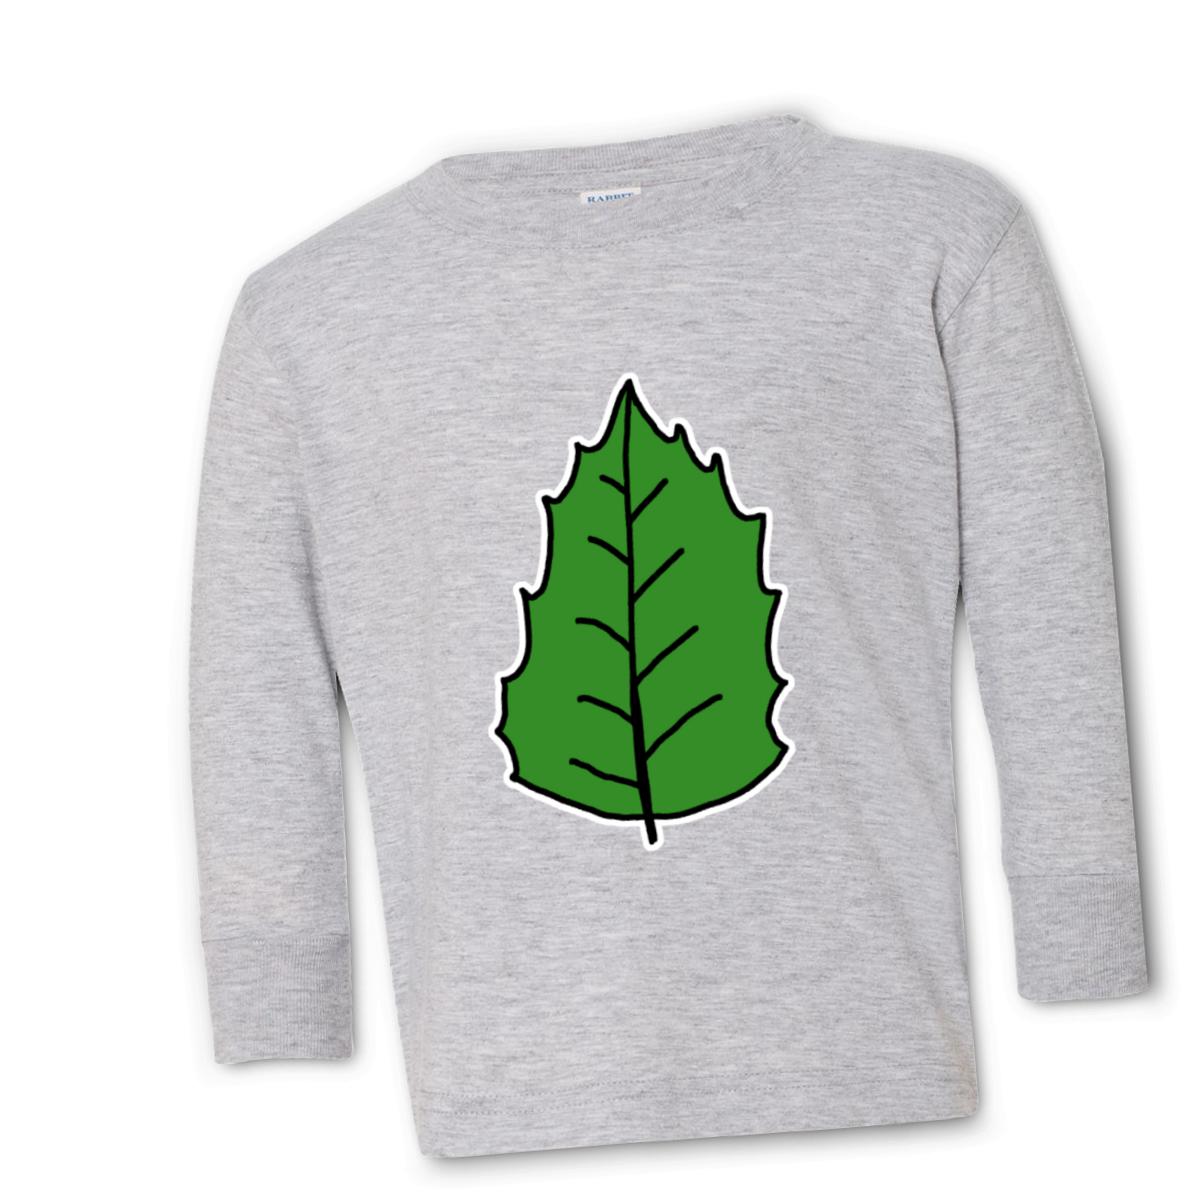 Holly Leaf Toddler Long Sleeve Tee 56T heather